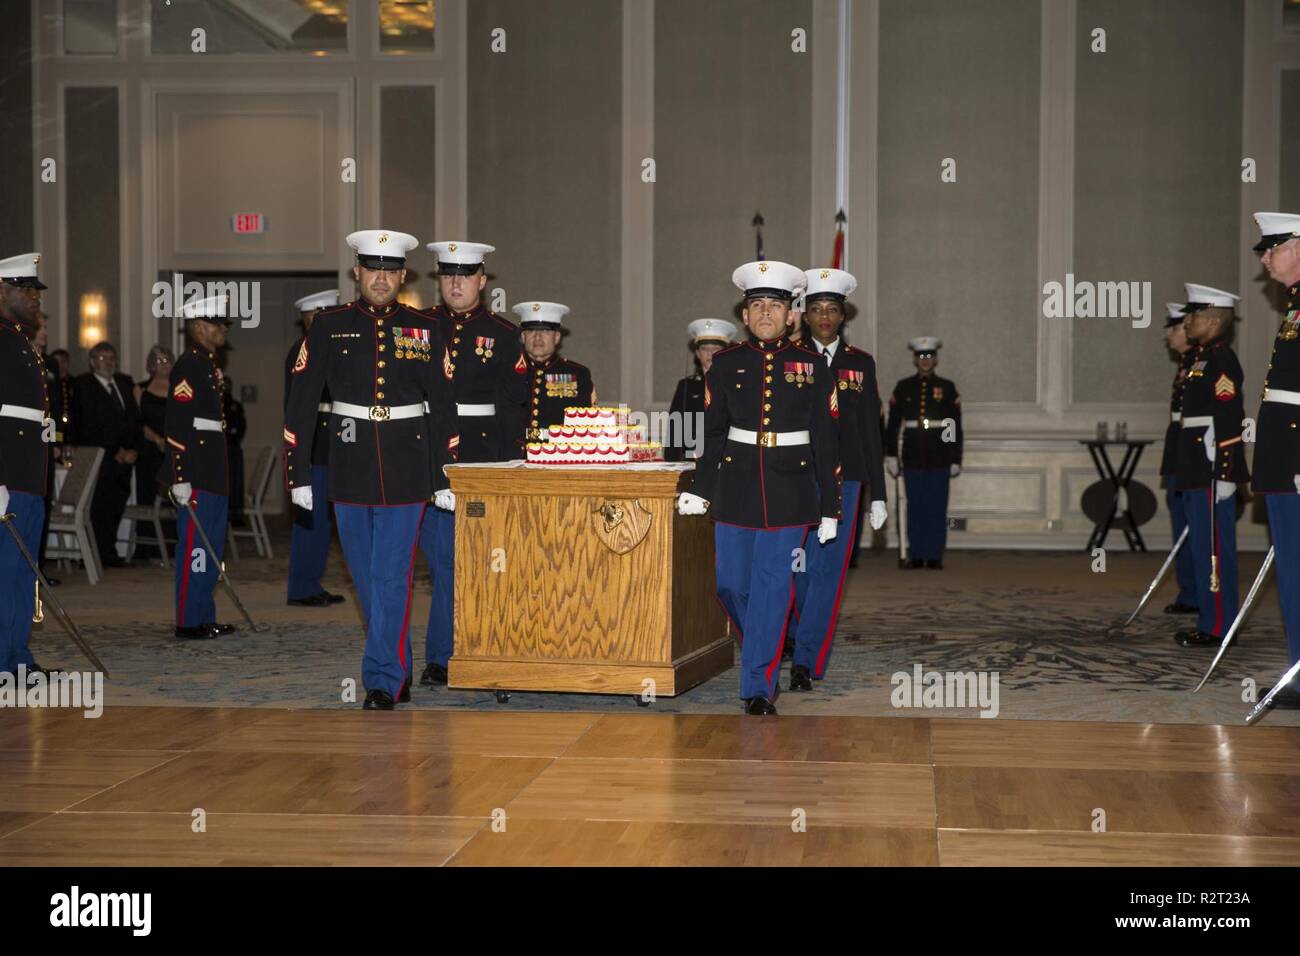 Marines with Headquarters Service Battalion escort the birthday cake for the cake cutting ceremony during the units Marine Cops Birthday Ball celebration on Hilton Head Island, Nov. 9. Headquarters and Service Battalion is the parent command for personnel who provide continuous support to the depot and its subordinate commands in order to accomplish the depot’s mission of “Making Marines.” Stock Photo